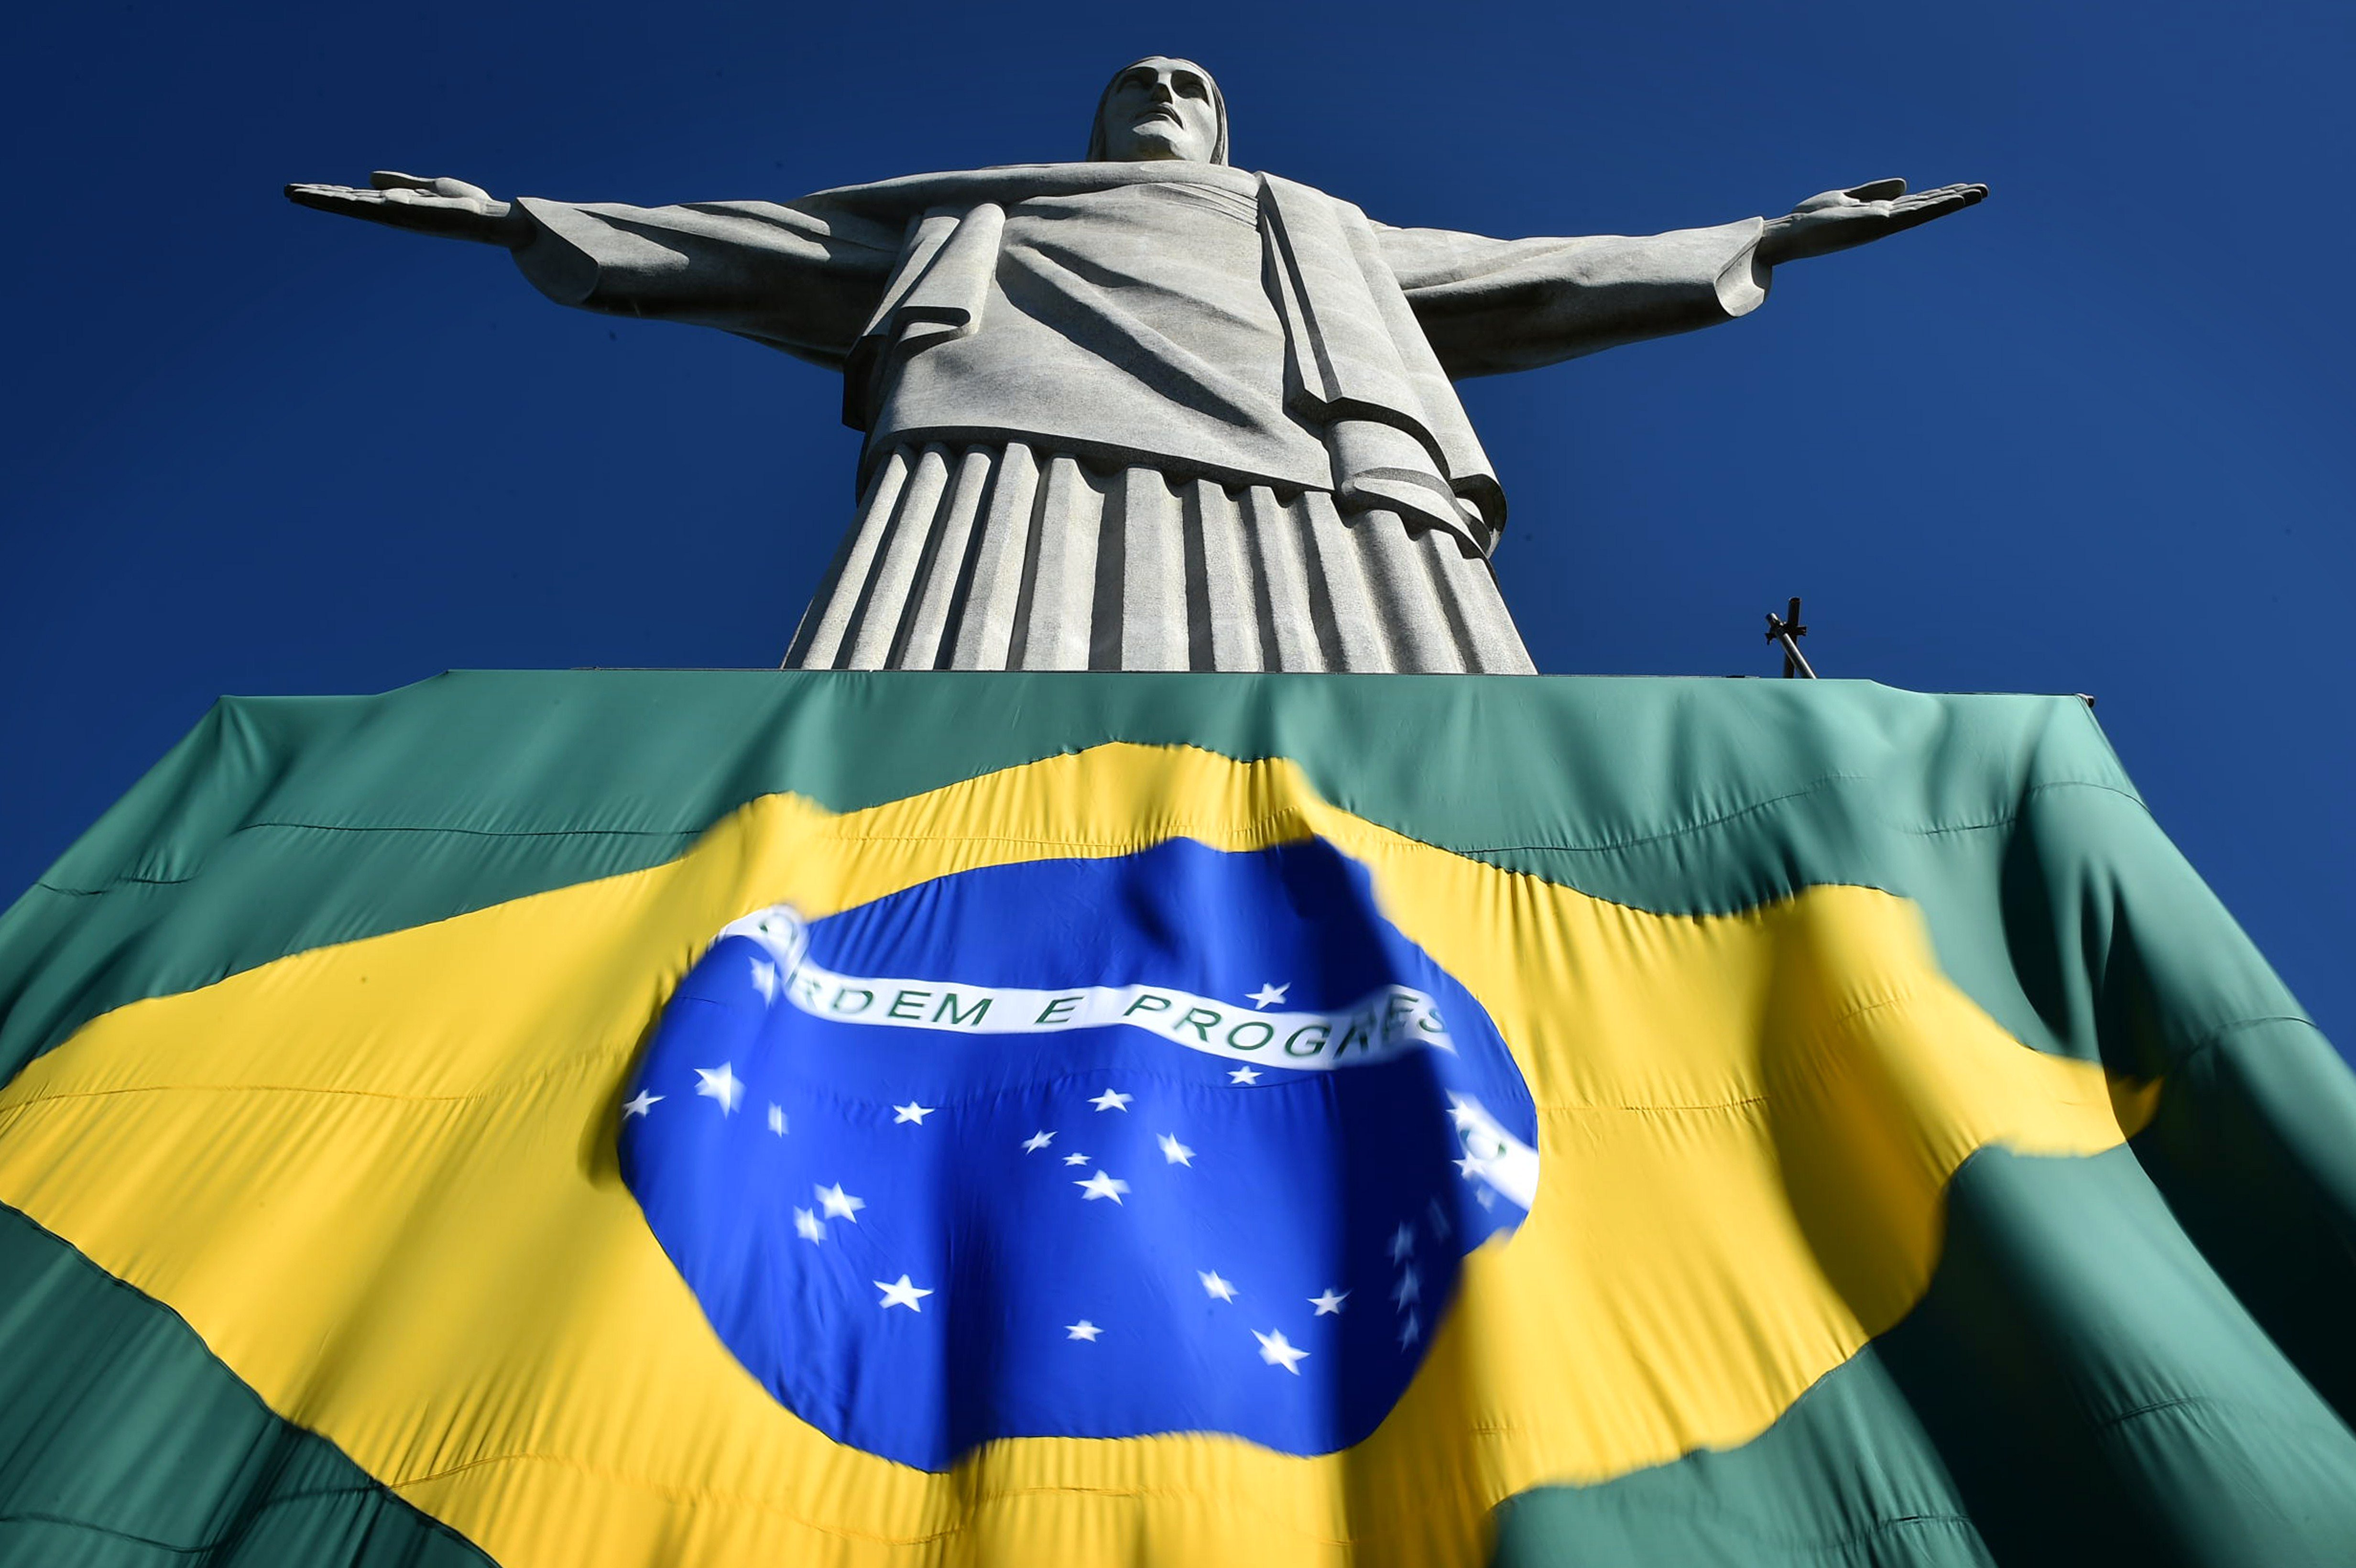 The Brazilian flag is seen at the base of the statue of the Christ the Redeemer on top of Corcovado hill in Rio de Janeiro on June 12, 2014.